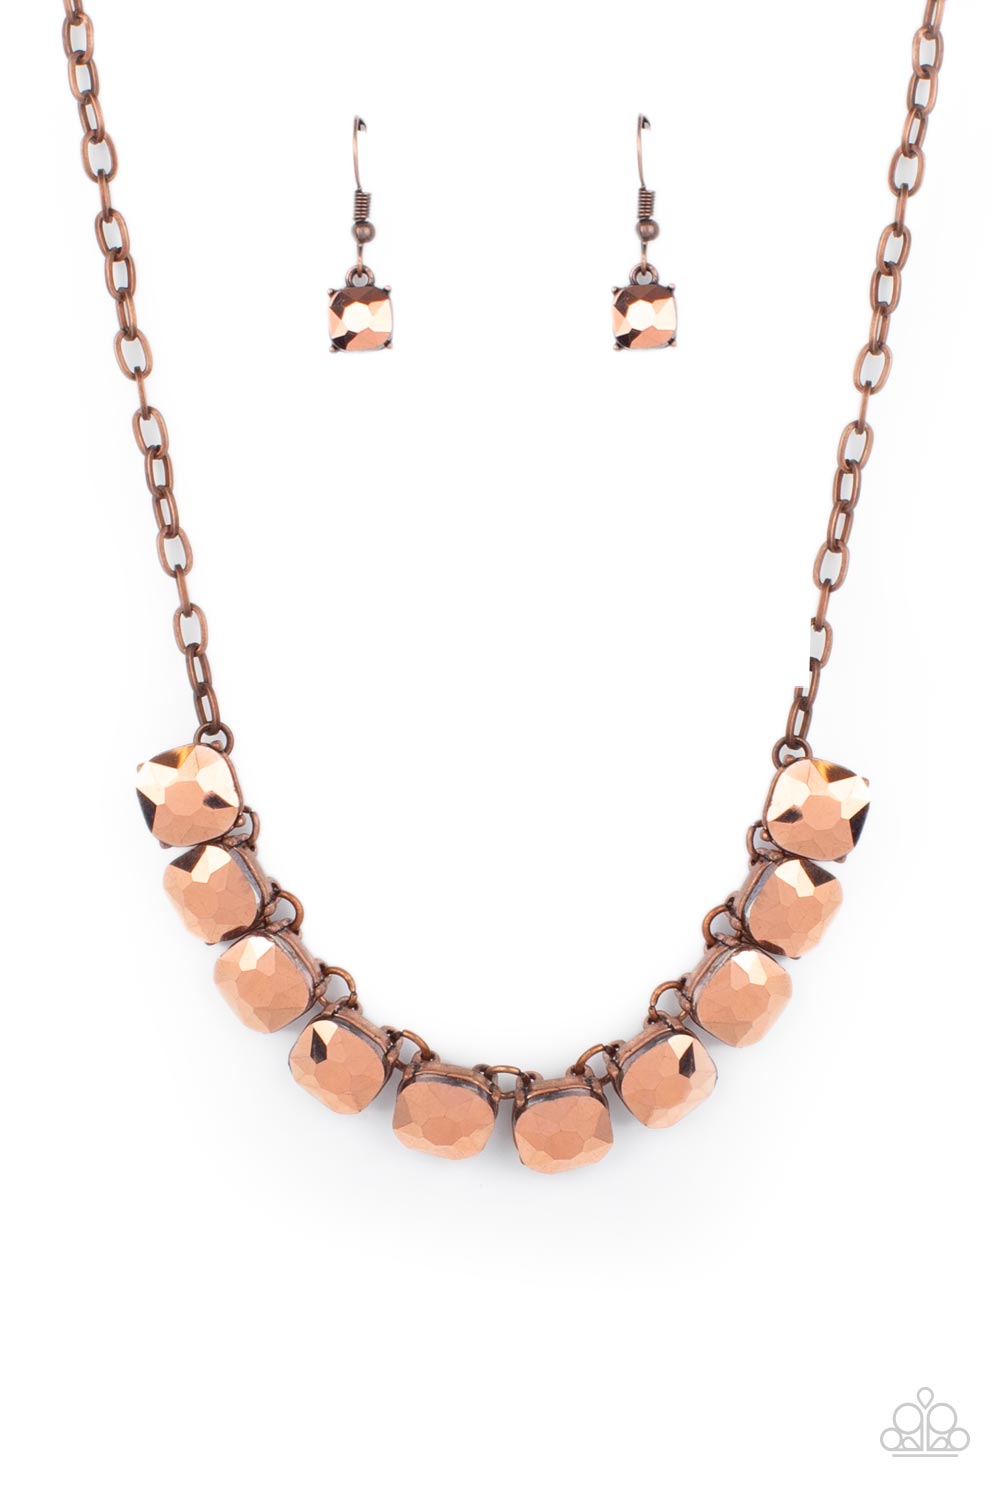 Radiance Squared Necklace (Brass, Copper, Silver)